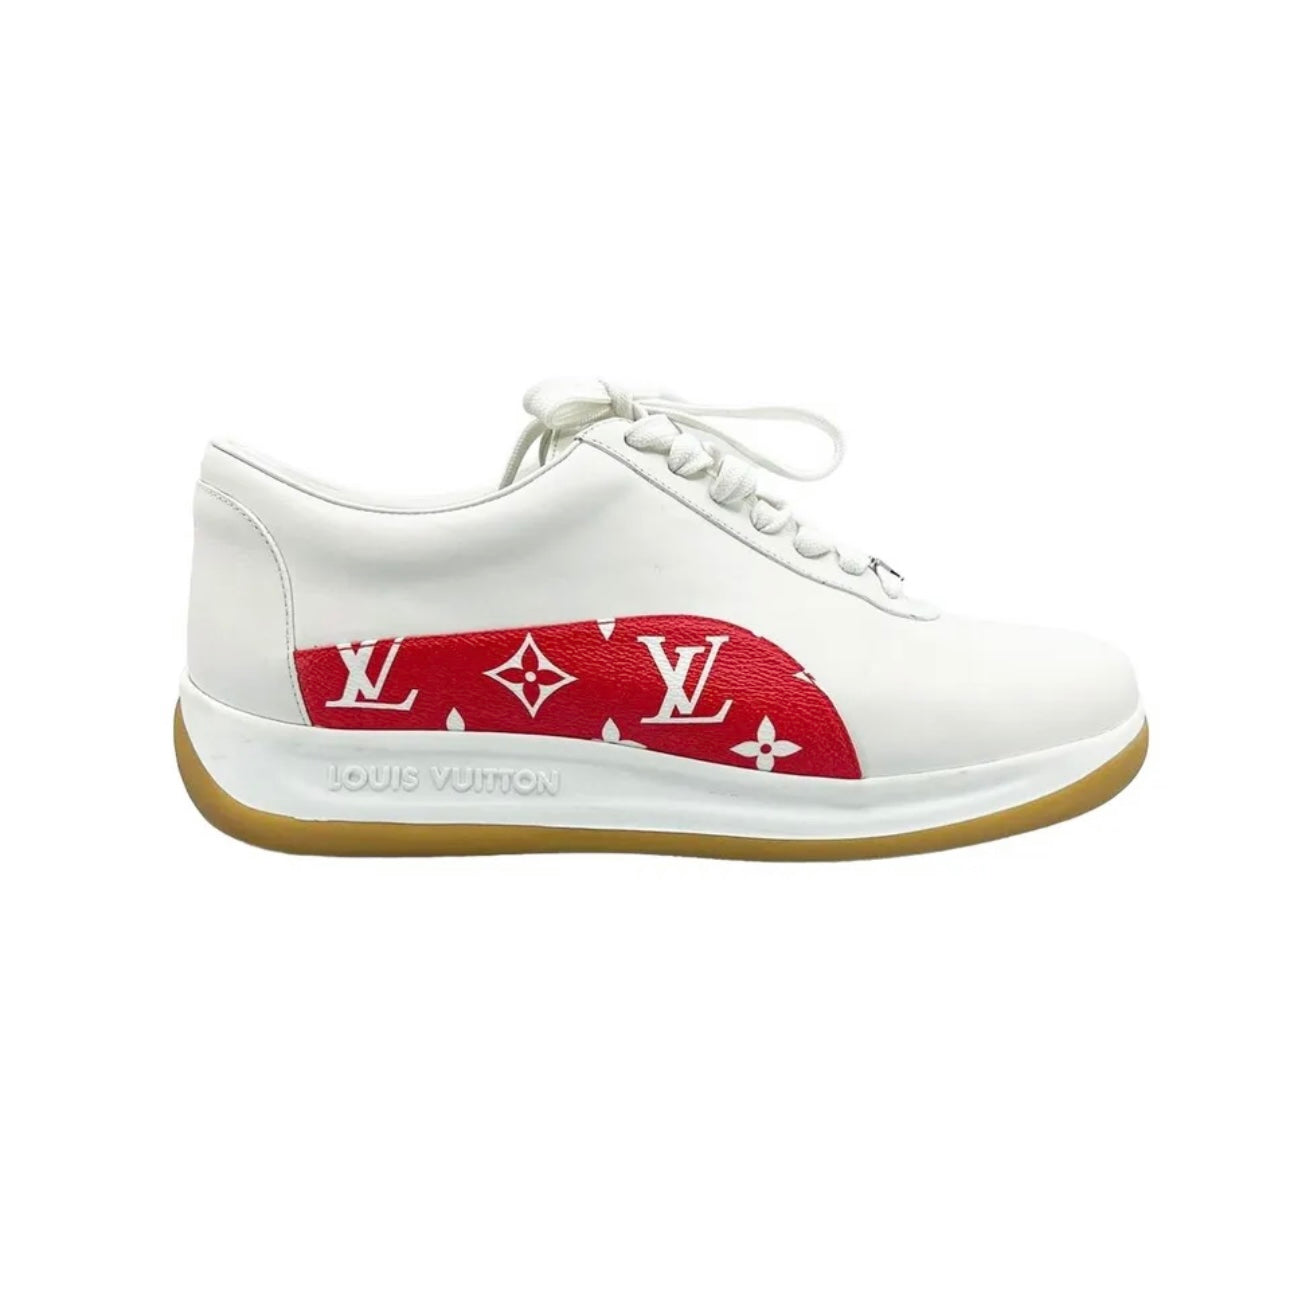 Louis Vuitton x Supreme Limited Monogram Men Sneakers Size 9.5US with Box